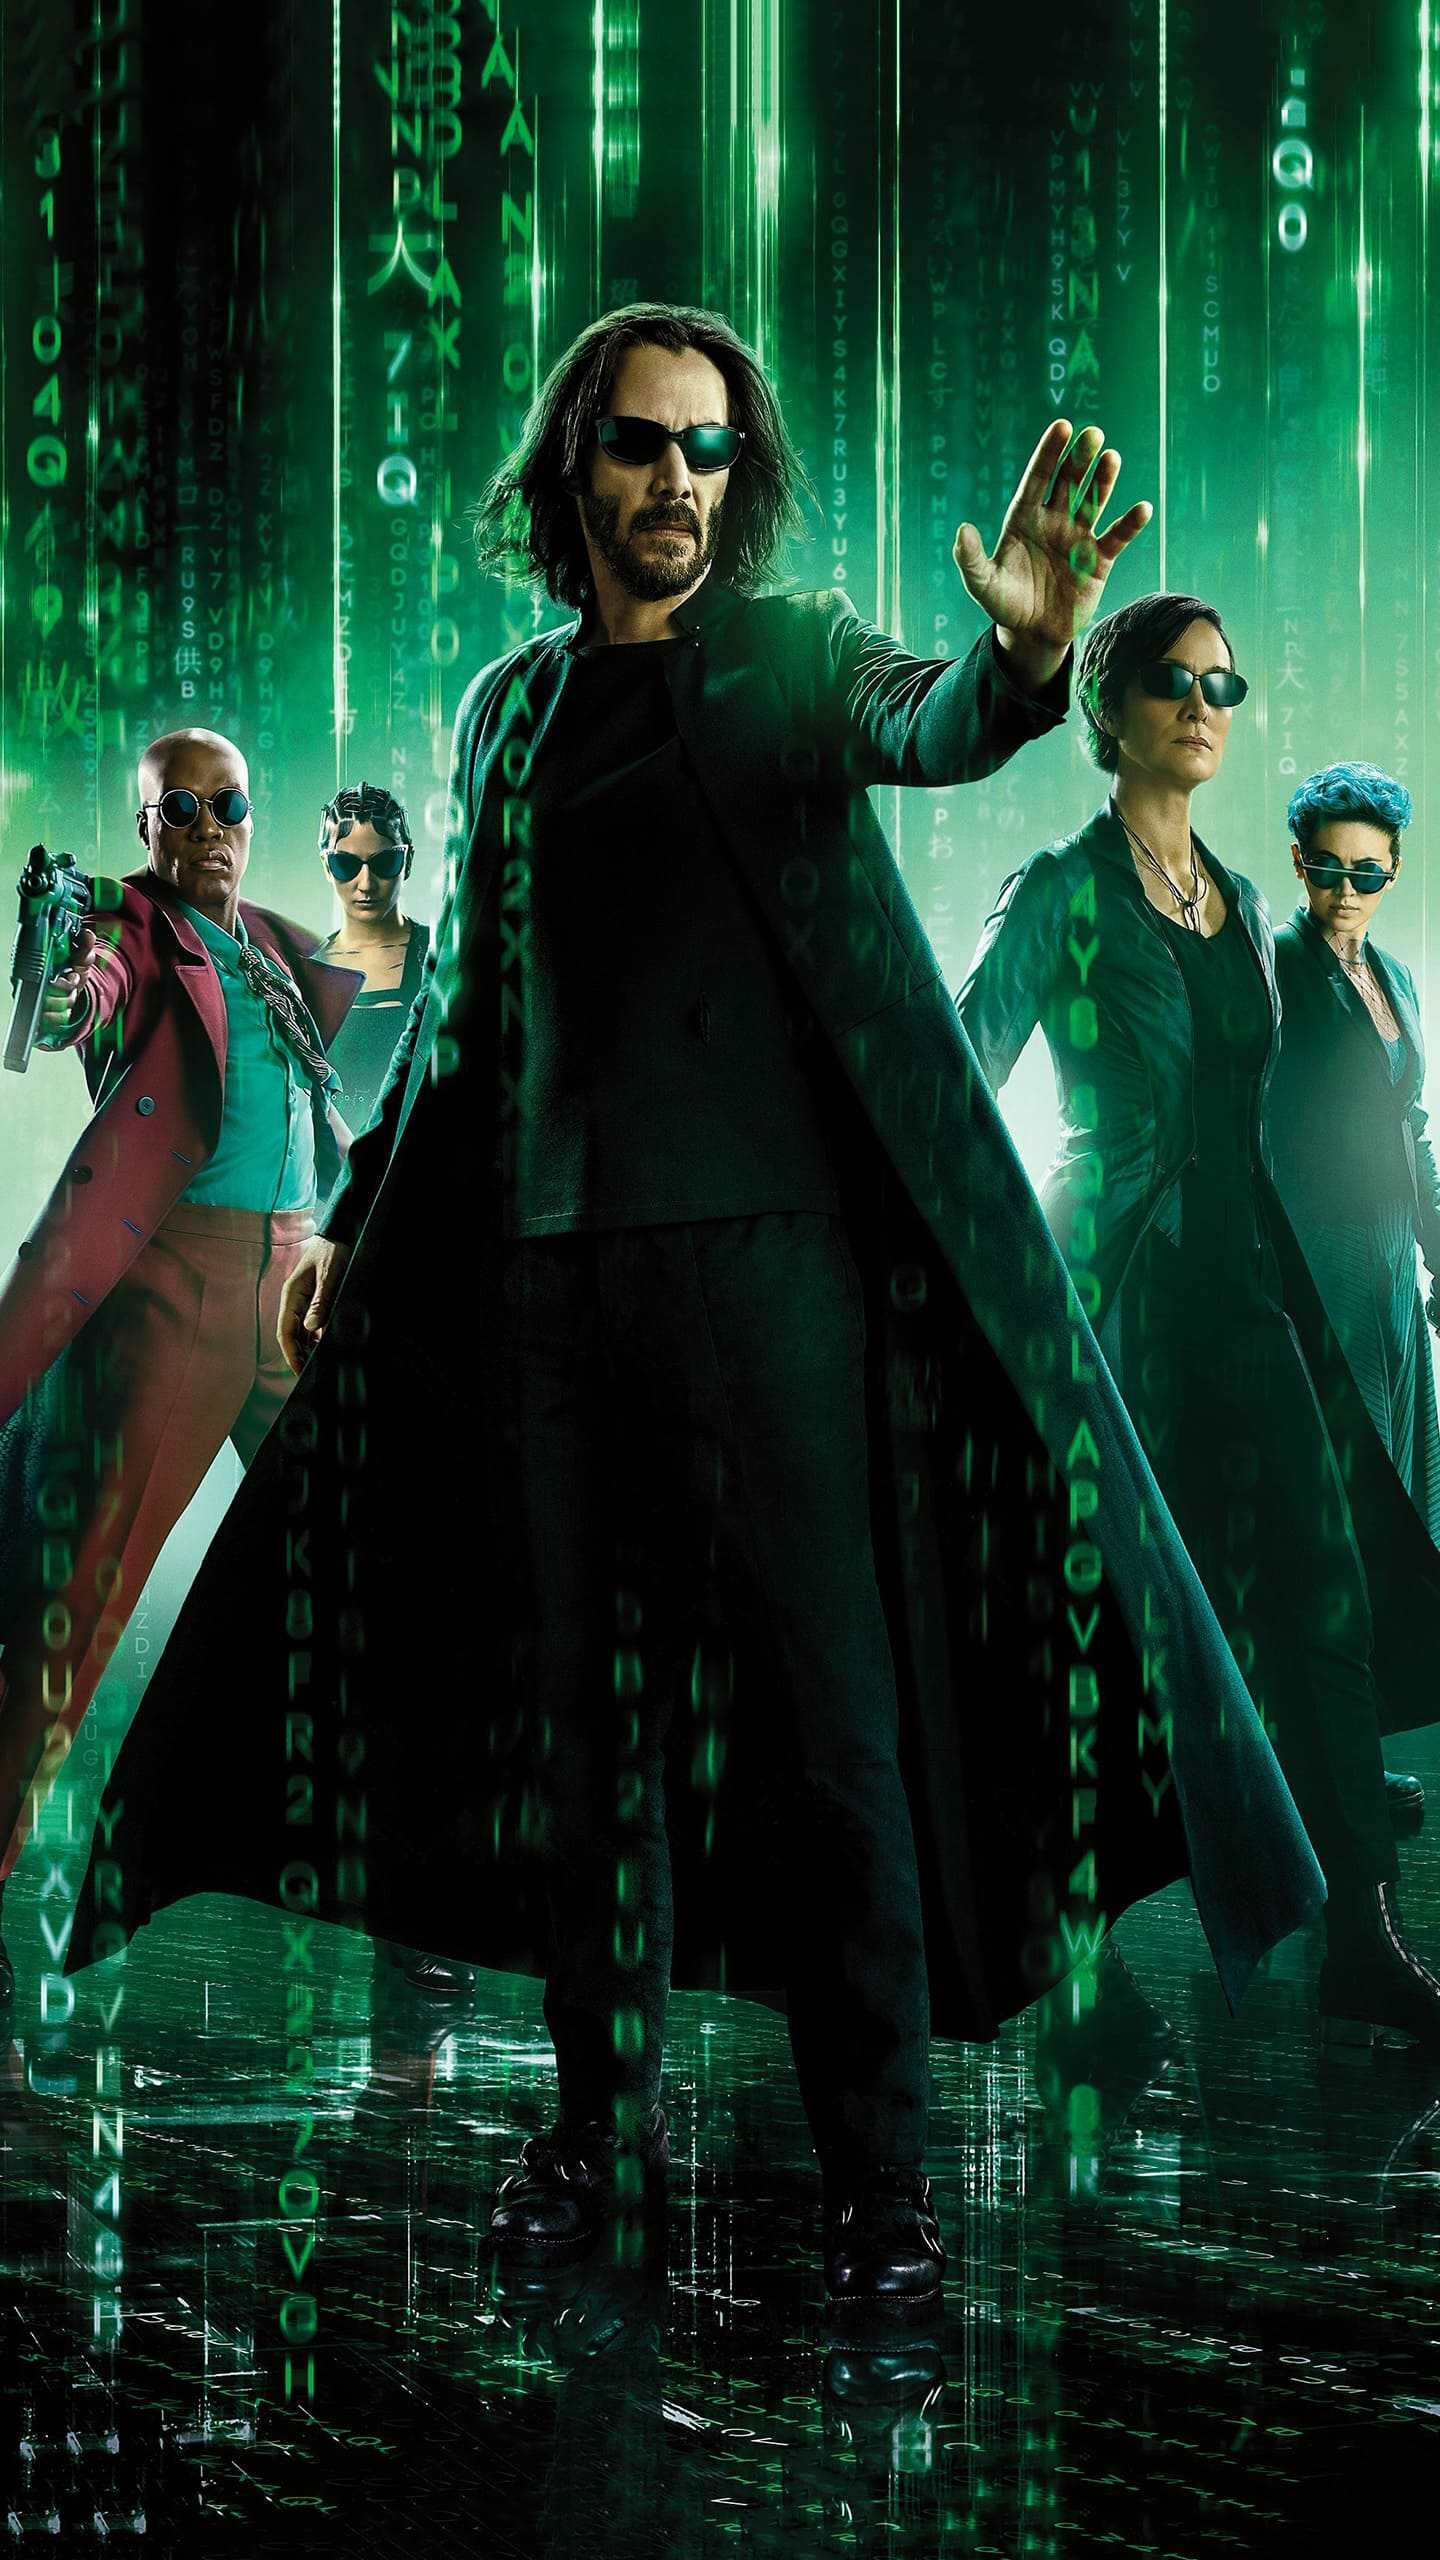 Matrix Franchise: An American media franchise consisting of four feature films, Science fiction. 1440x2560 HD Background.